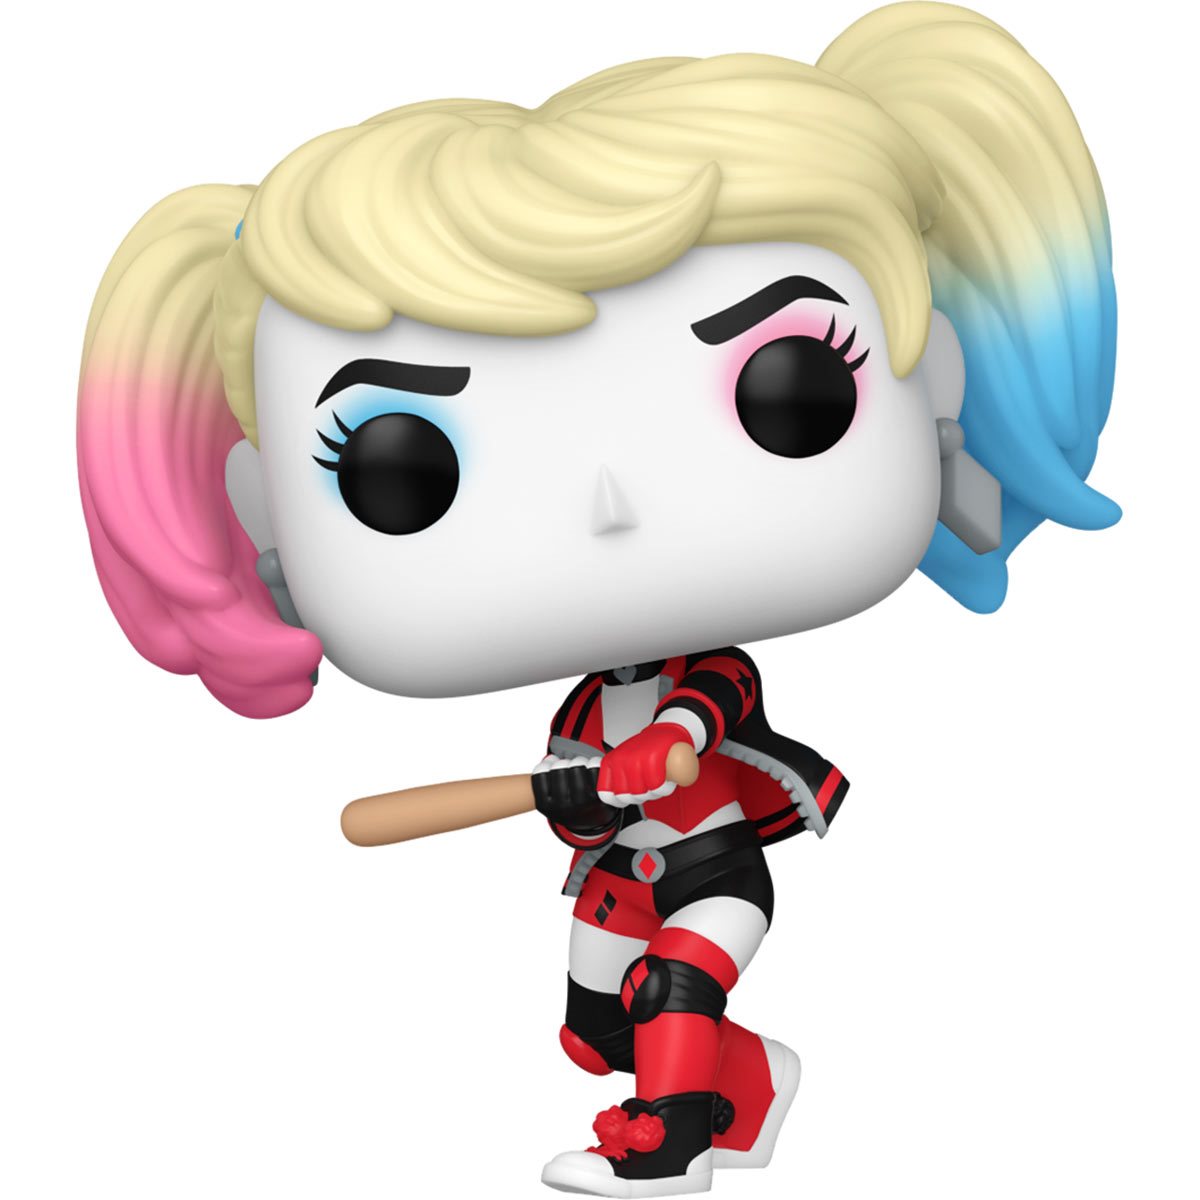 Funko Pop! DC Heroes Harley Quinn Takeover - Harley with Bat #451